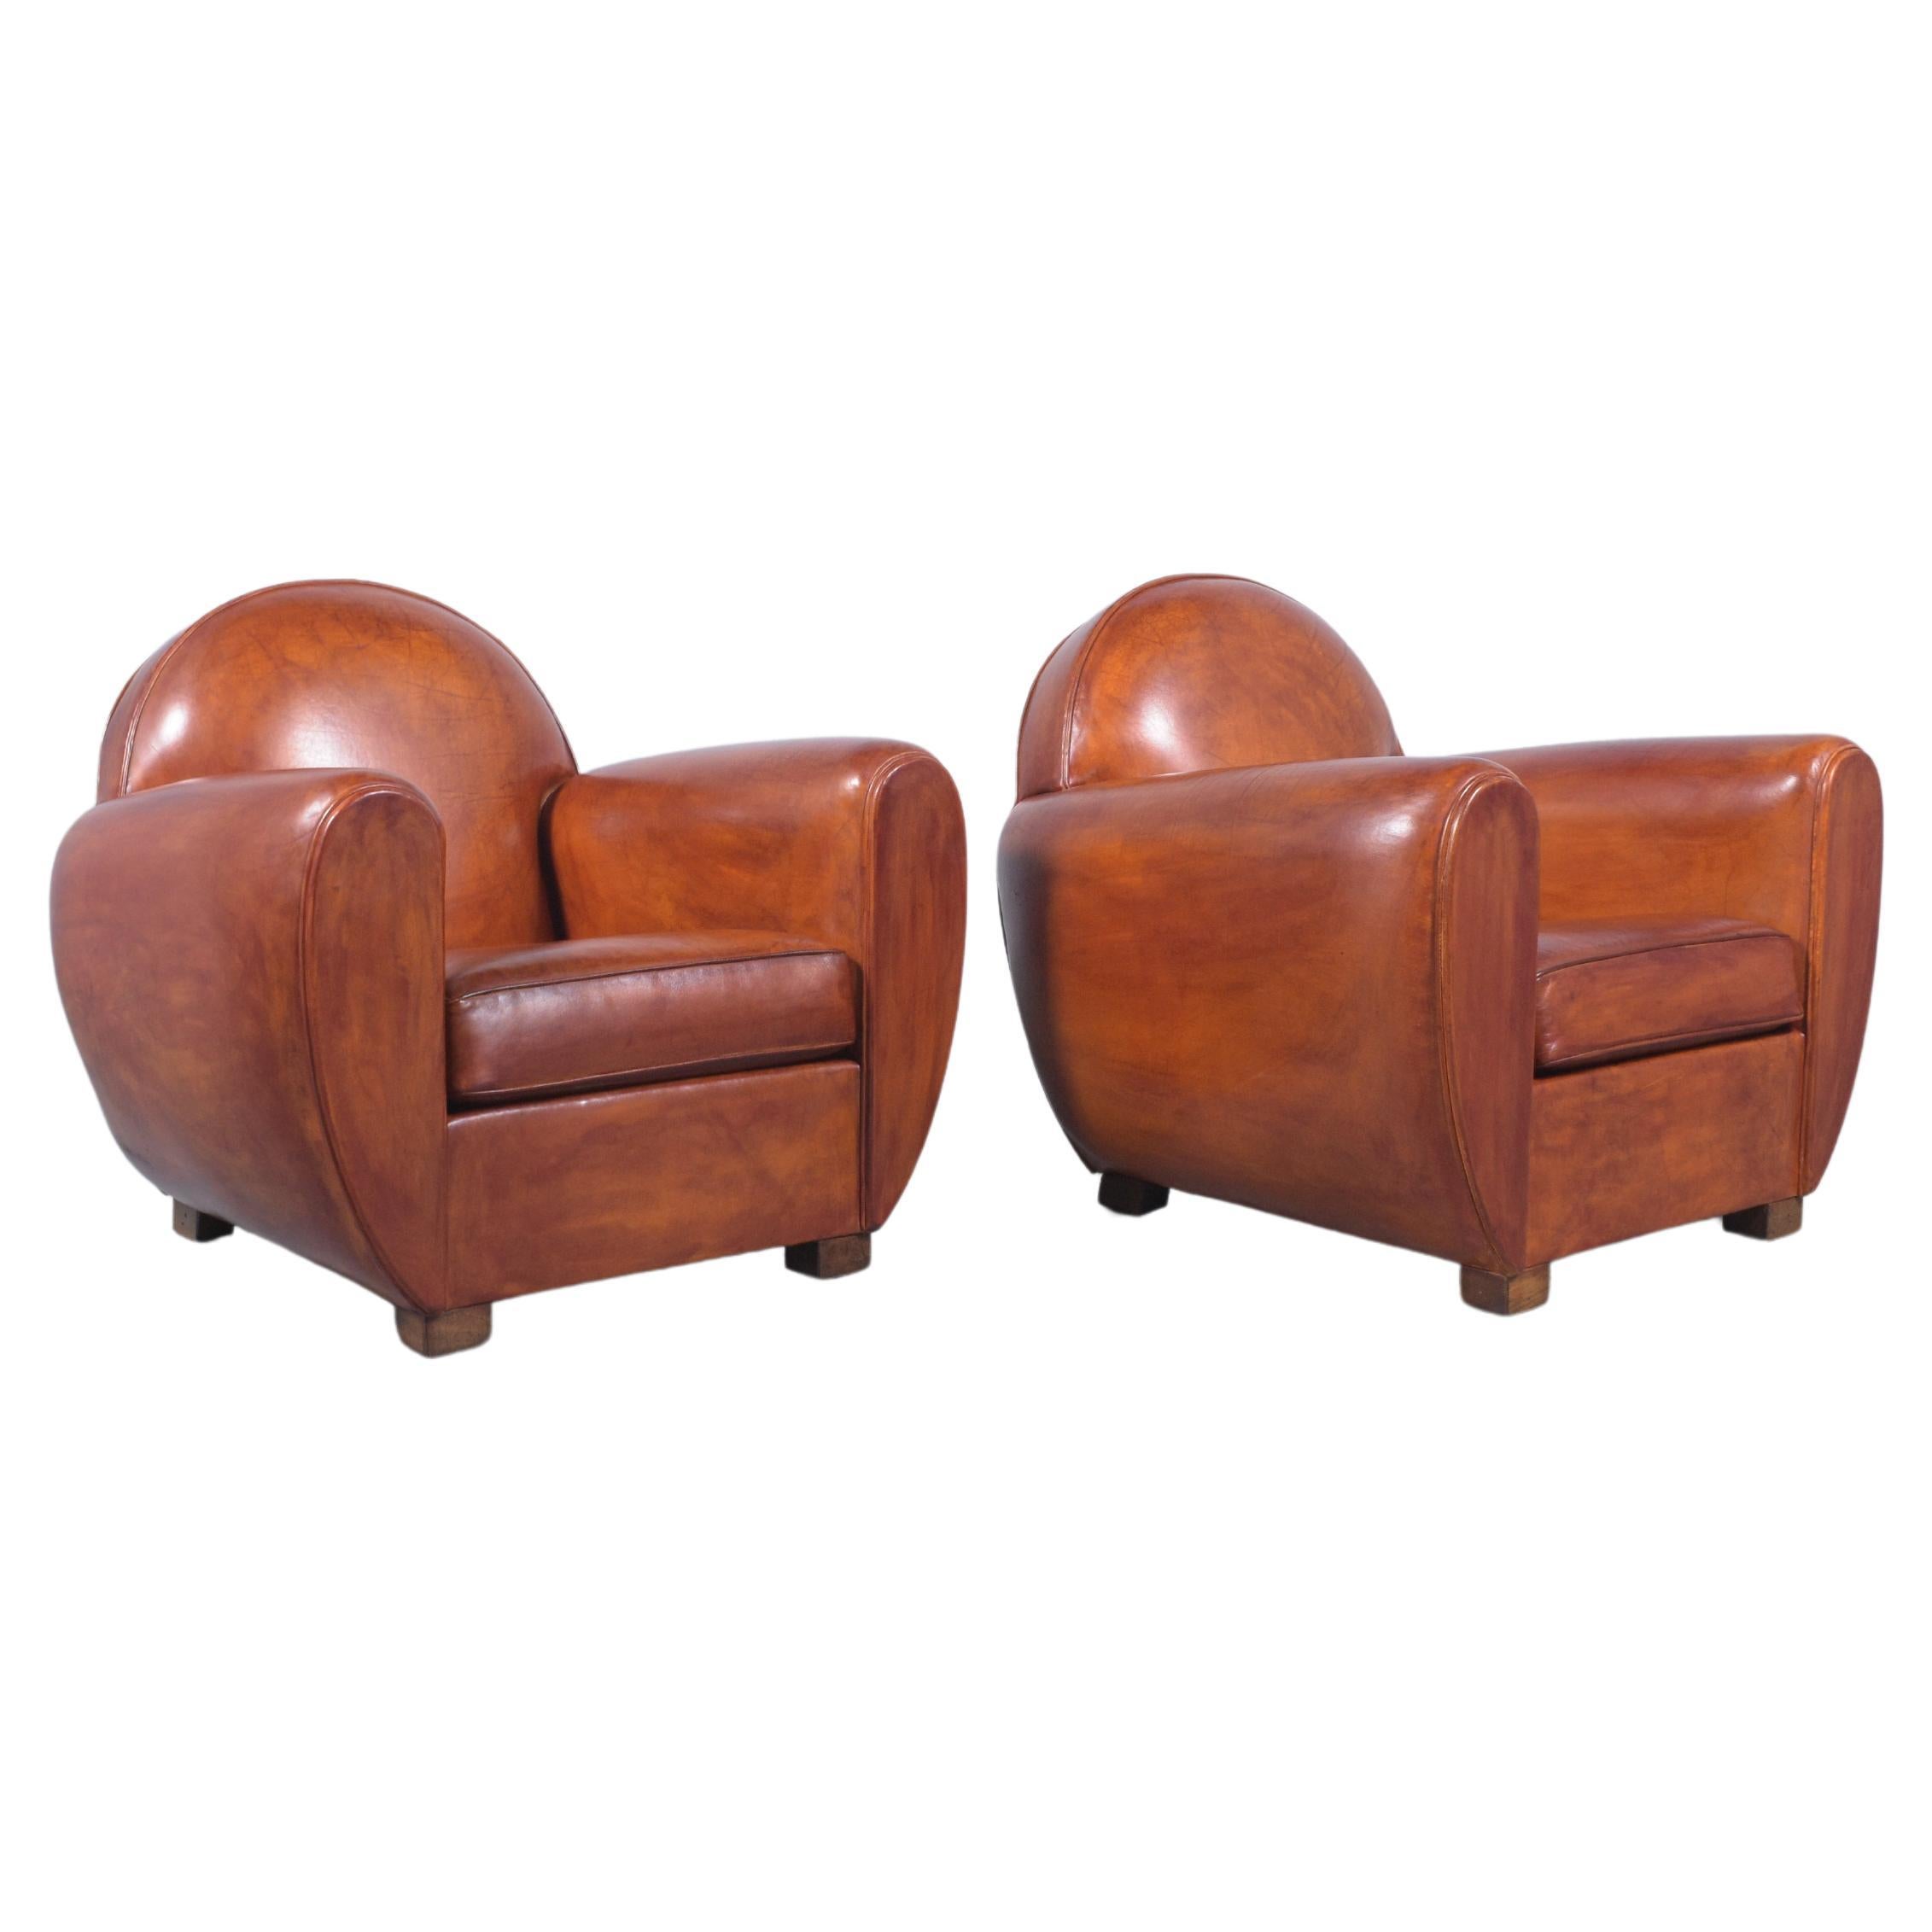 Restored Art Deco Club Chairs: 1960s French Deco Elegance For Sale